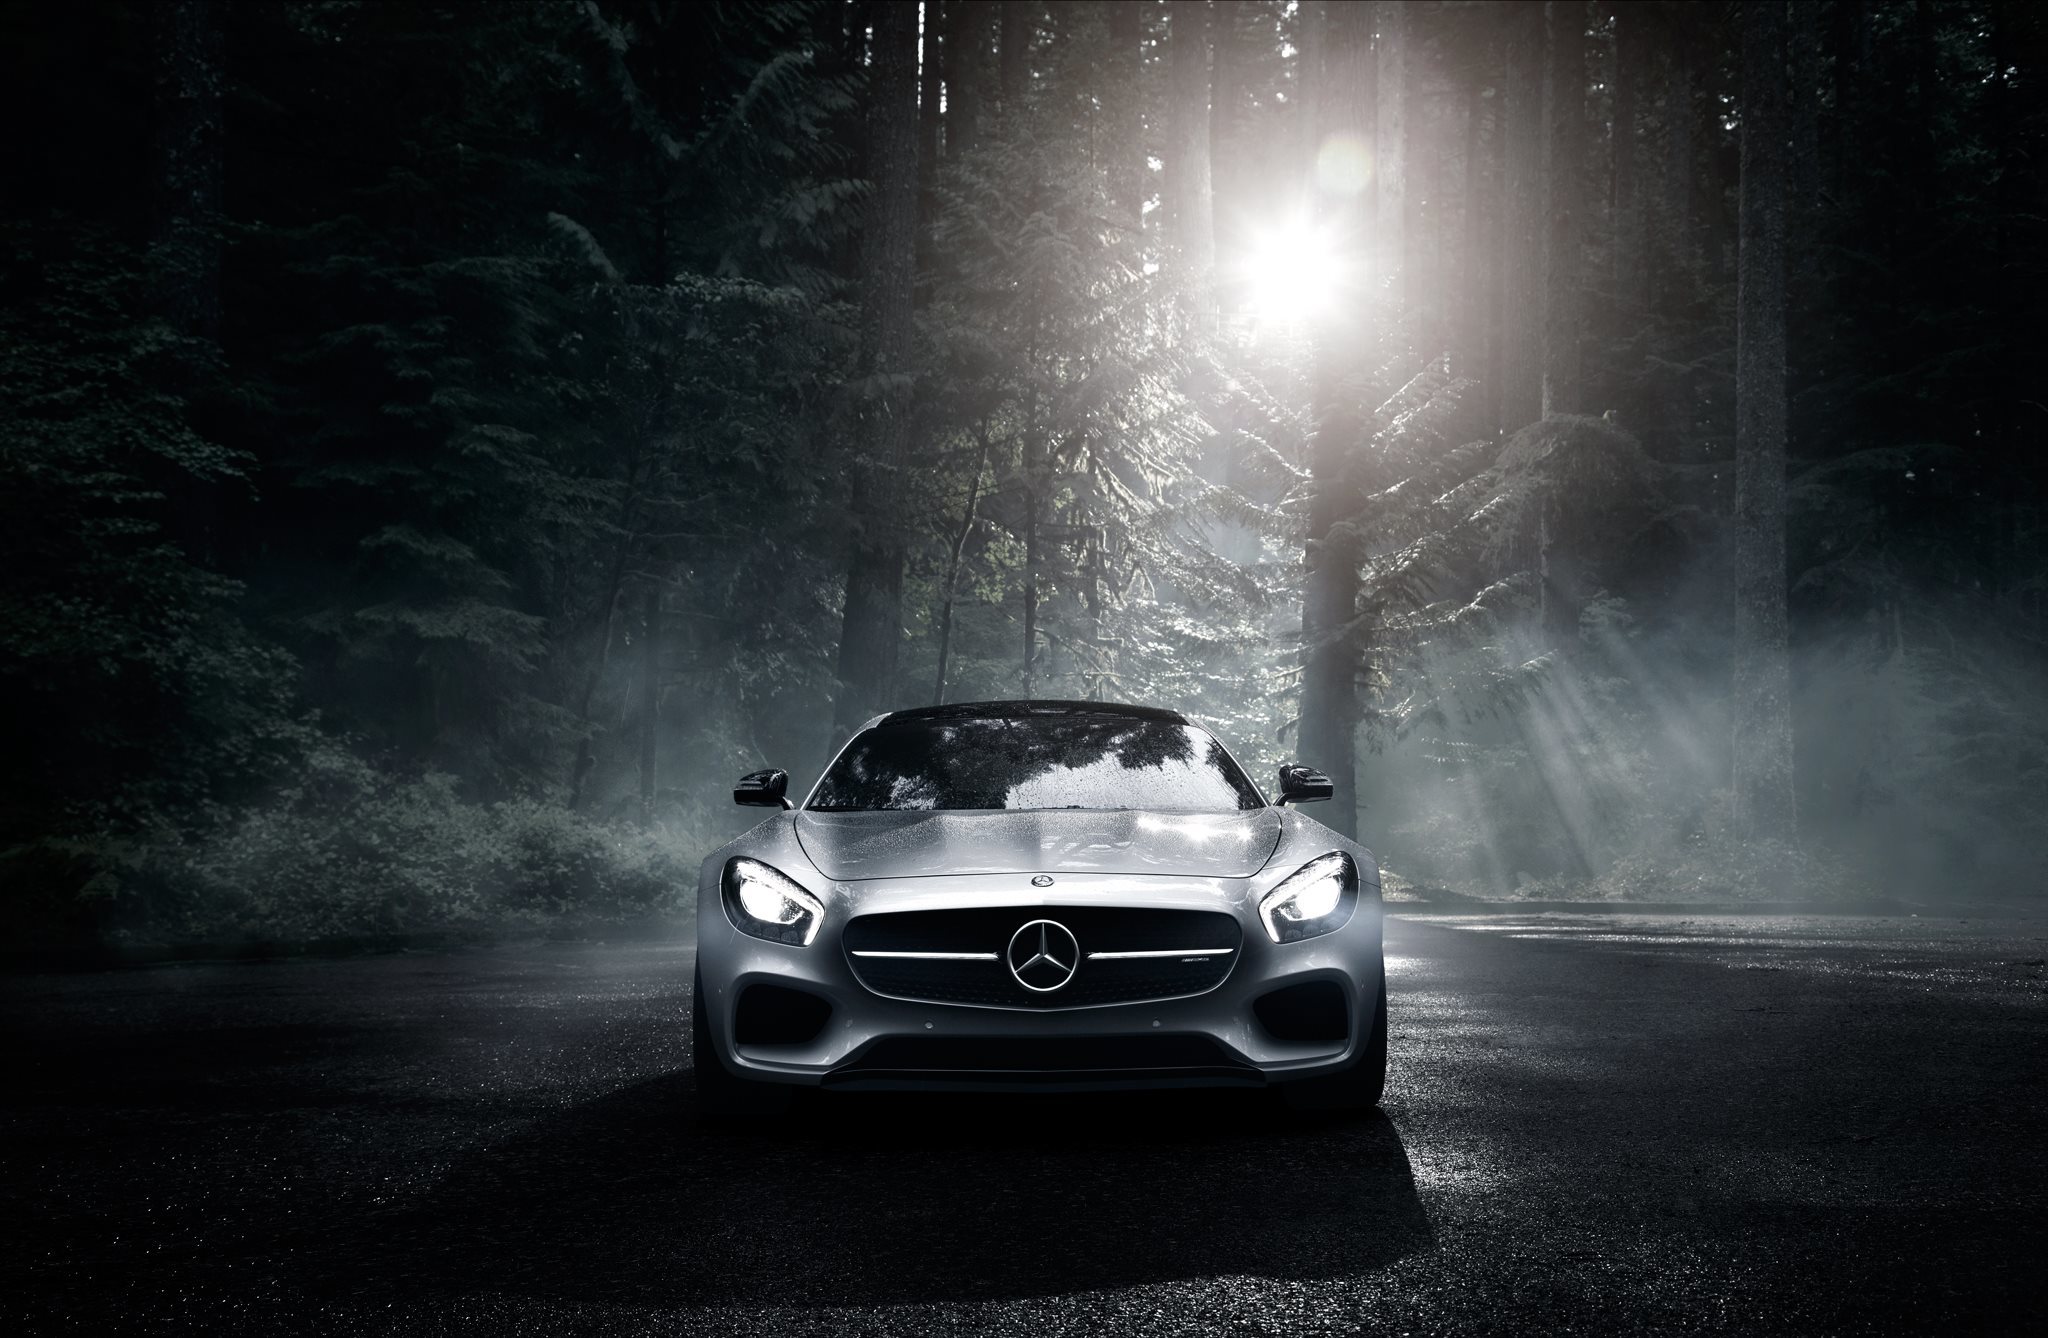 mercedes benz, gt s, cars, silvery, night, forest, front view, amg, silver, 2016